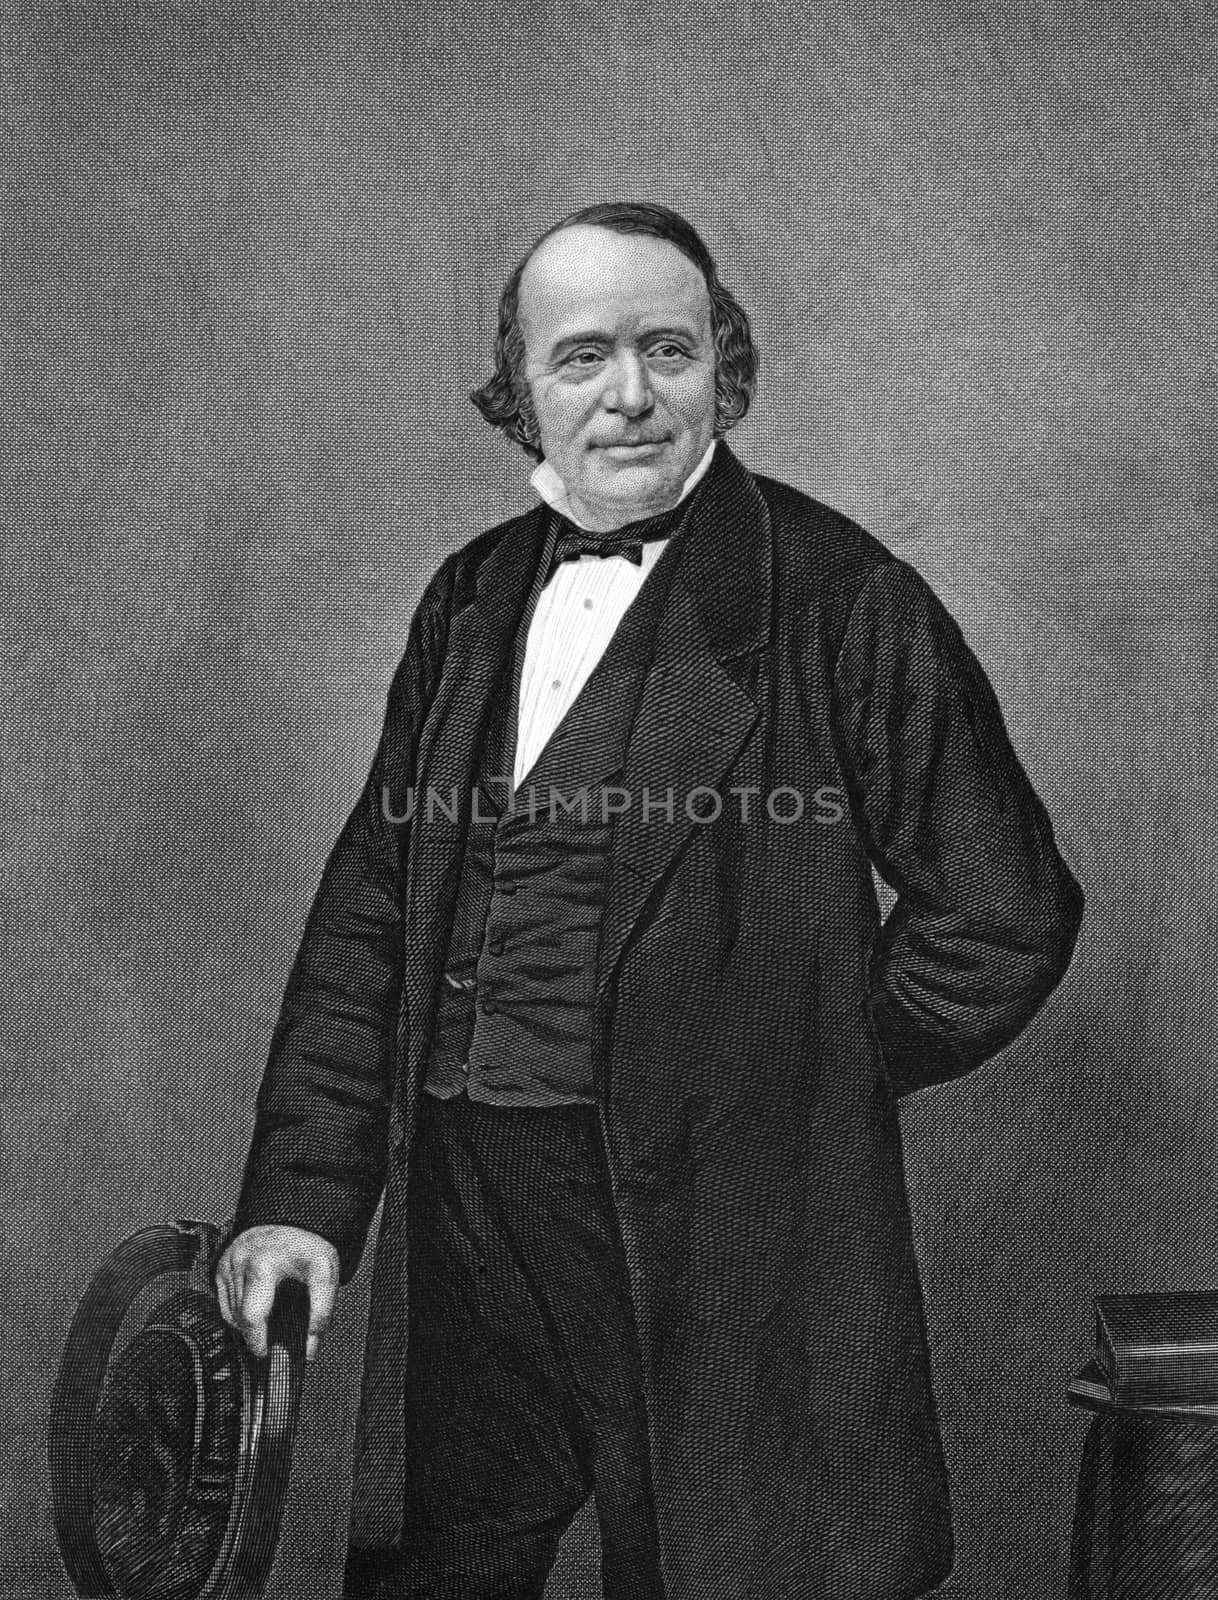 Louis Agassiz (1807-1873) on engraving from 1873. Swiss-born and European-trained biologist and geologist. Engraved by unknown artist and published in ''Portrait Gallery of Eminent Men and Women with Biographies'',USA,1873.